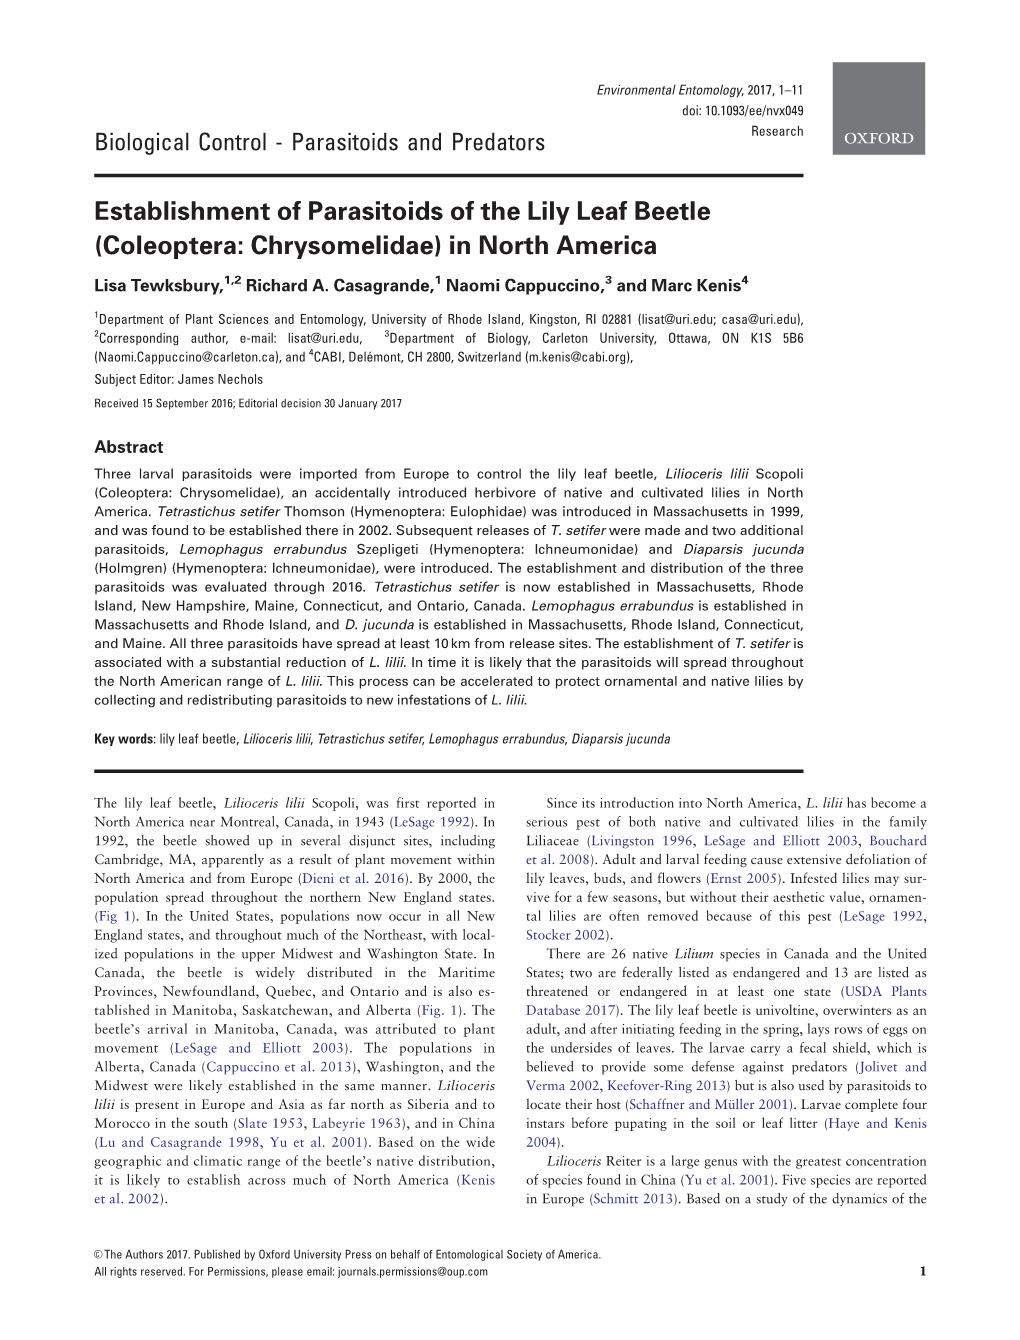 Establishment of Parasitoids of the Lily Leaf Beetle in North America